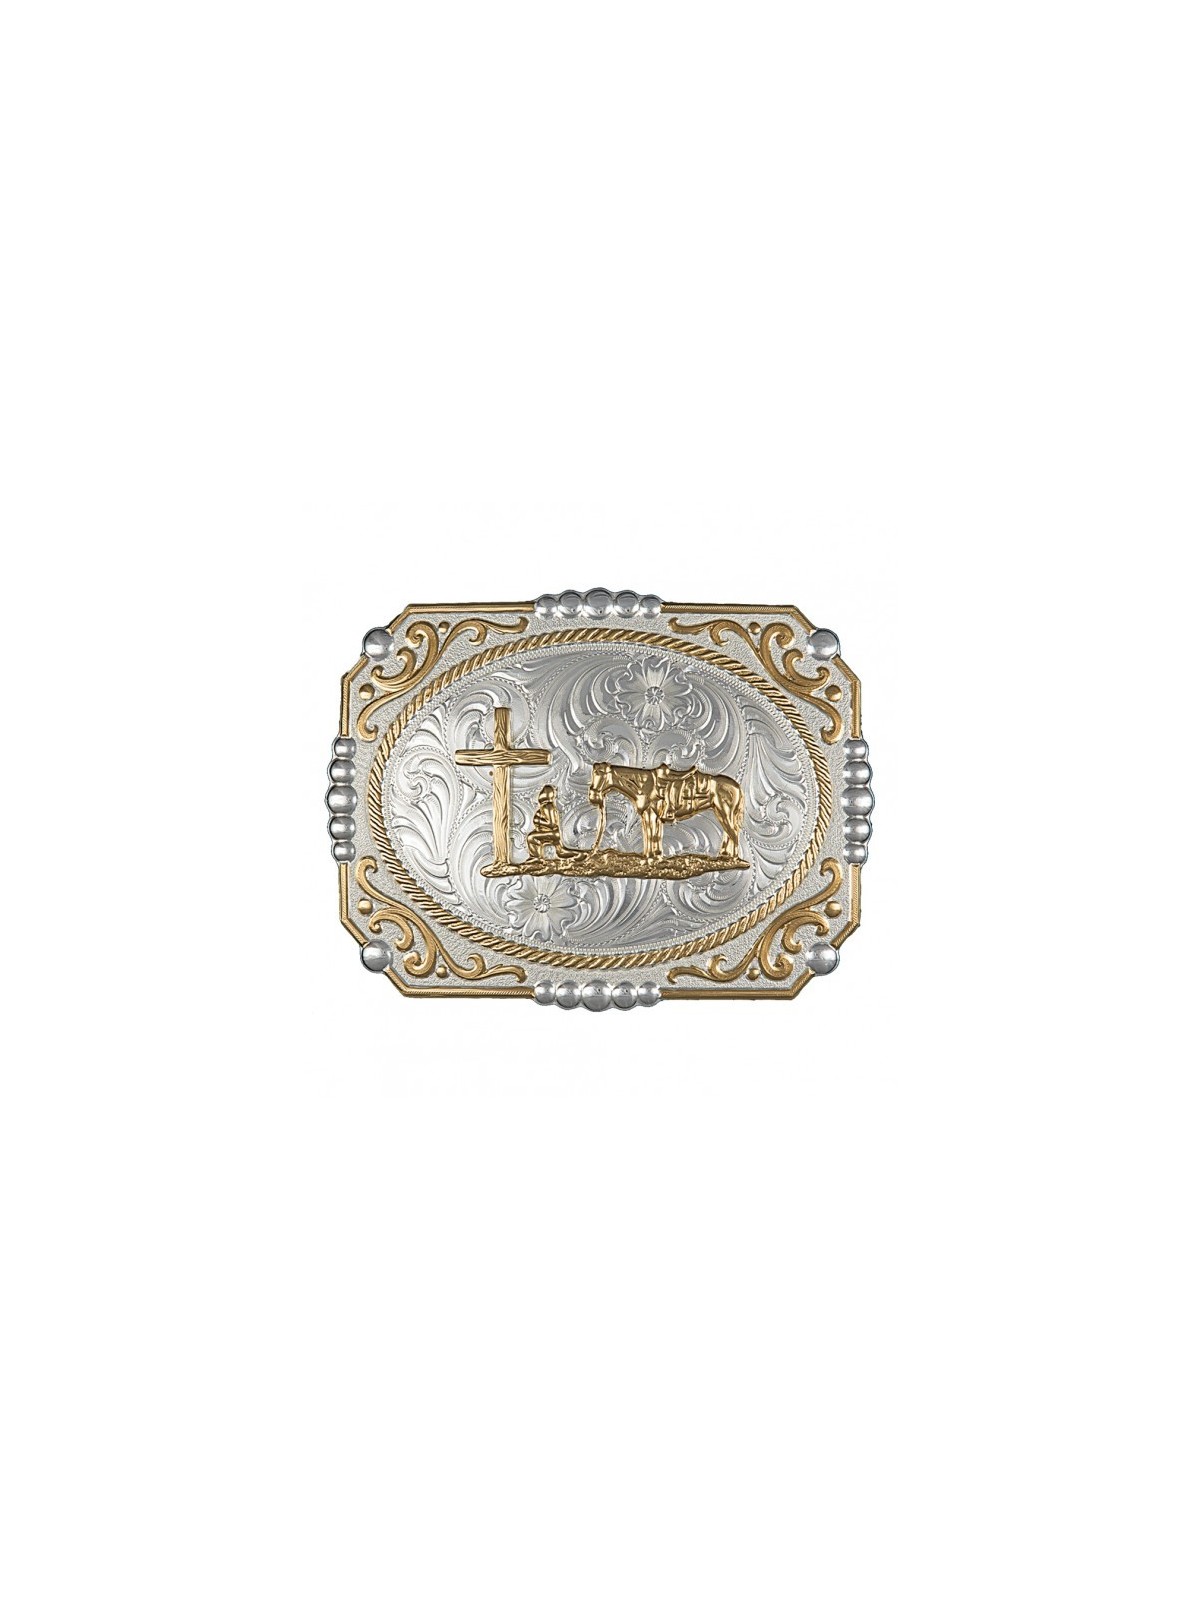 Two-tone Buckle with Cowboy 25815-731